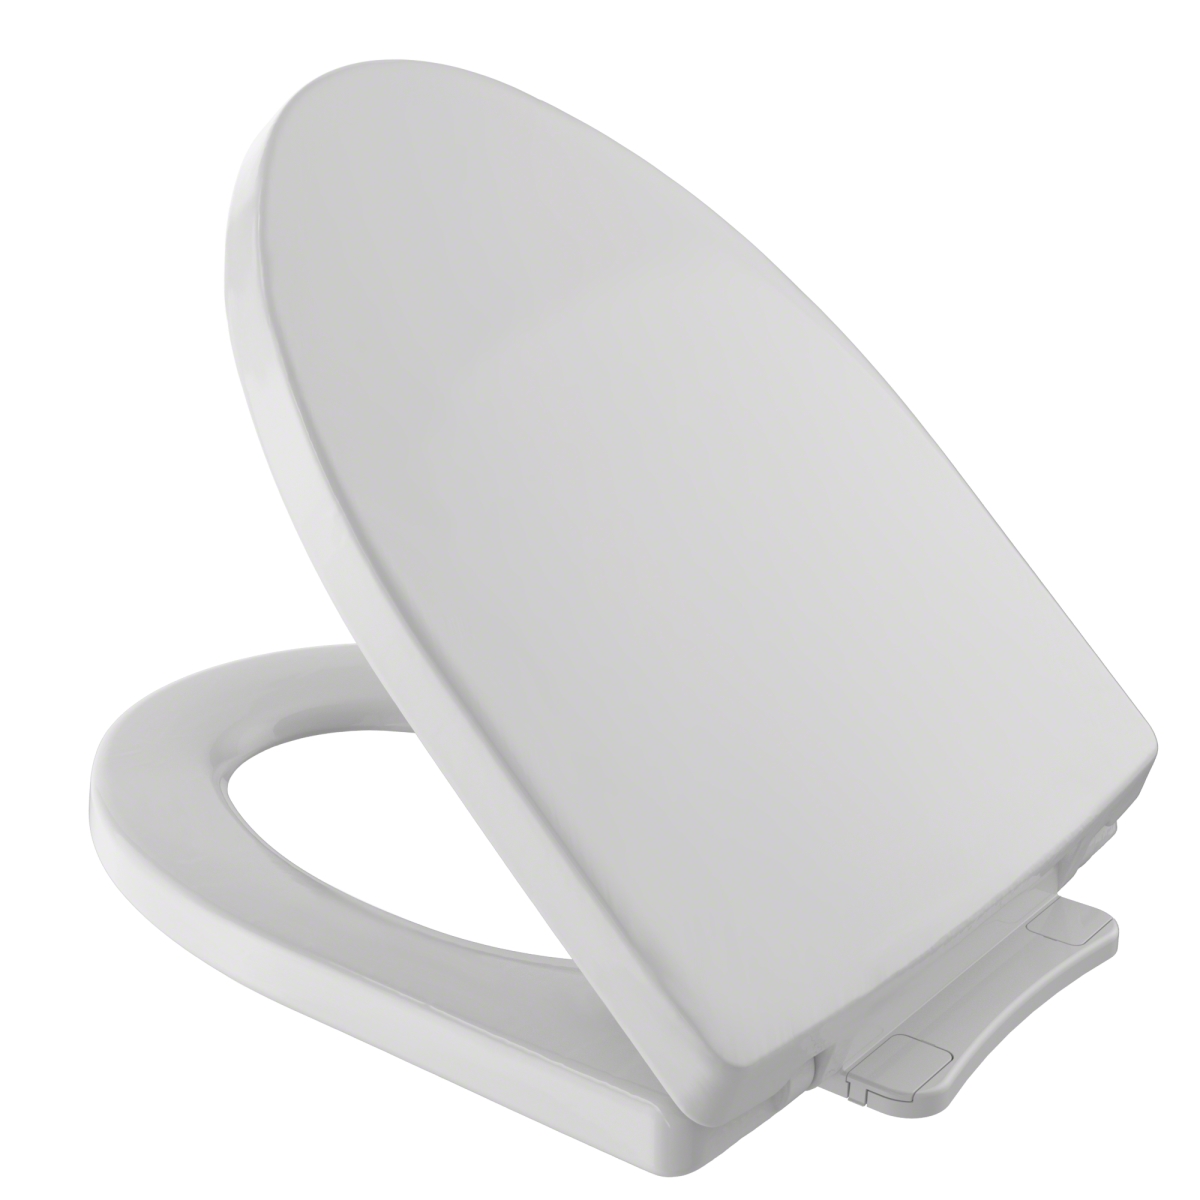 Ss214 No.11 Soiree Softclose Non Slamming - Slow Close Elongated Toilet Seat & Lid, Colonial White